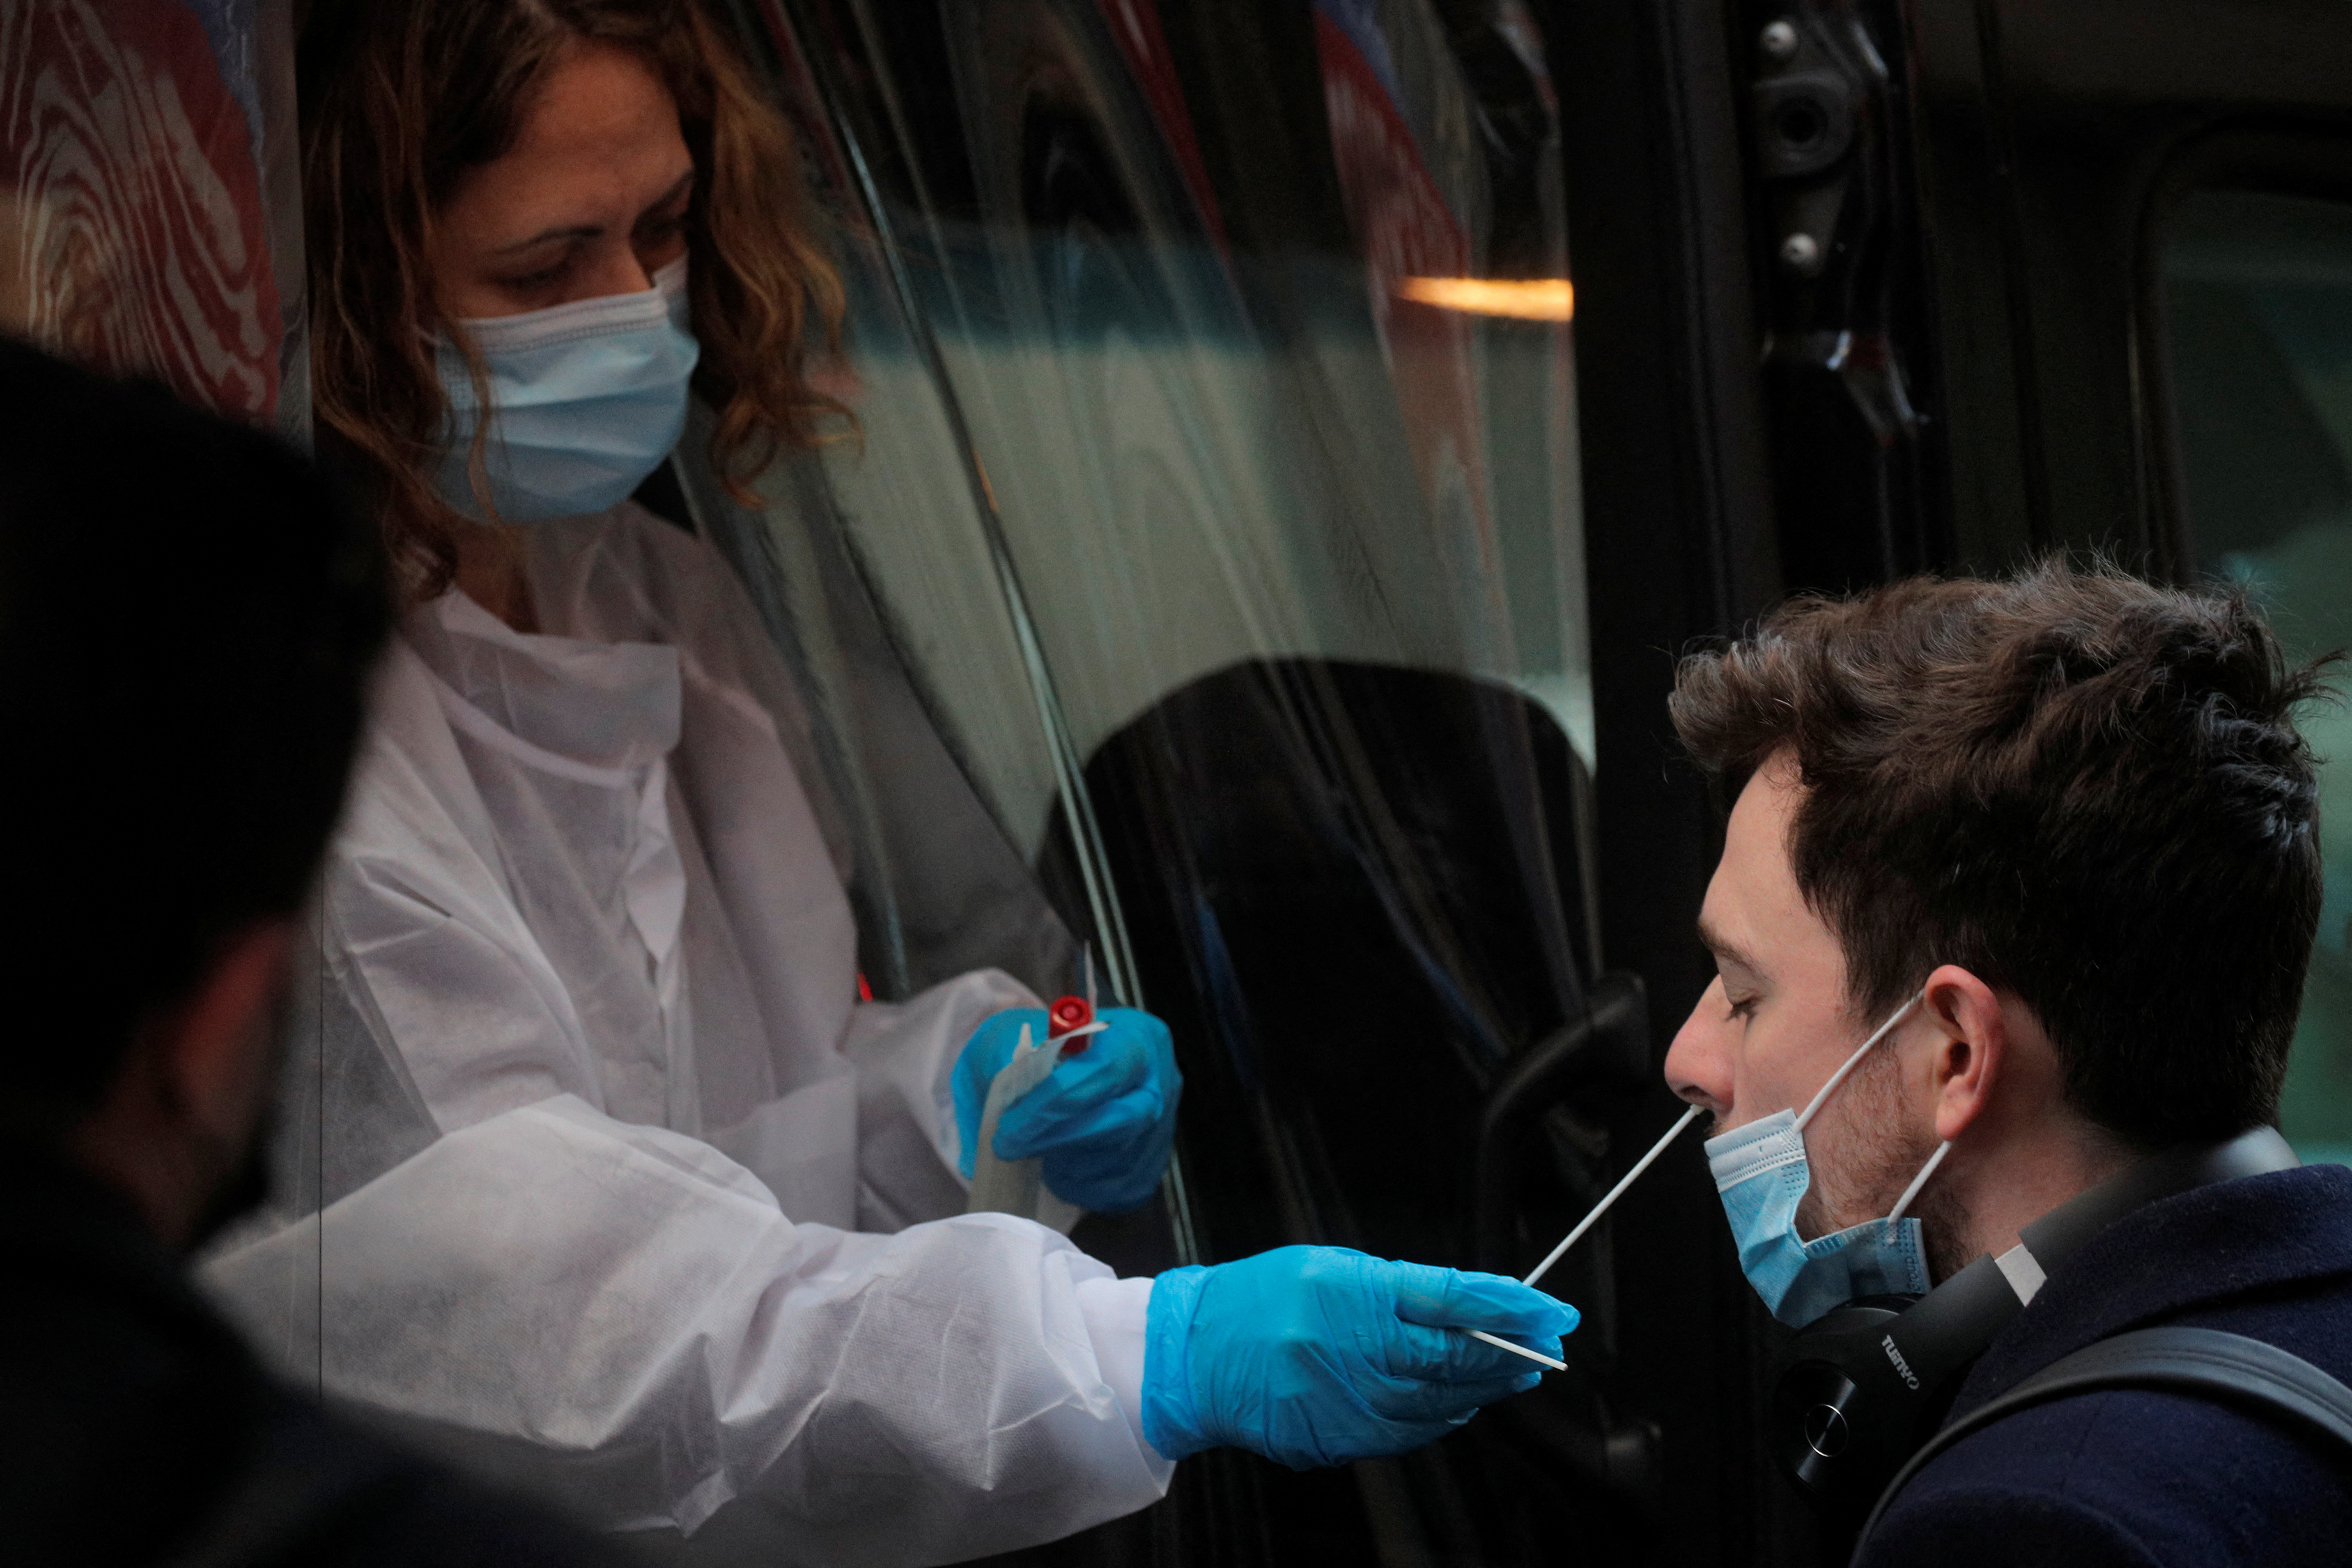 A man takes a coronavirus disease (COVID-19) test at pop-up testing site in New York